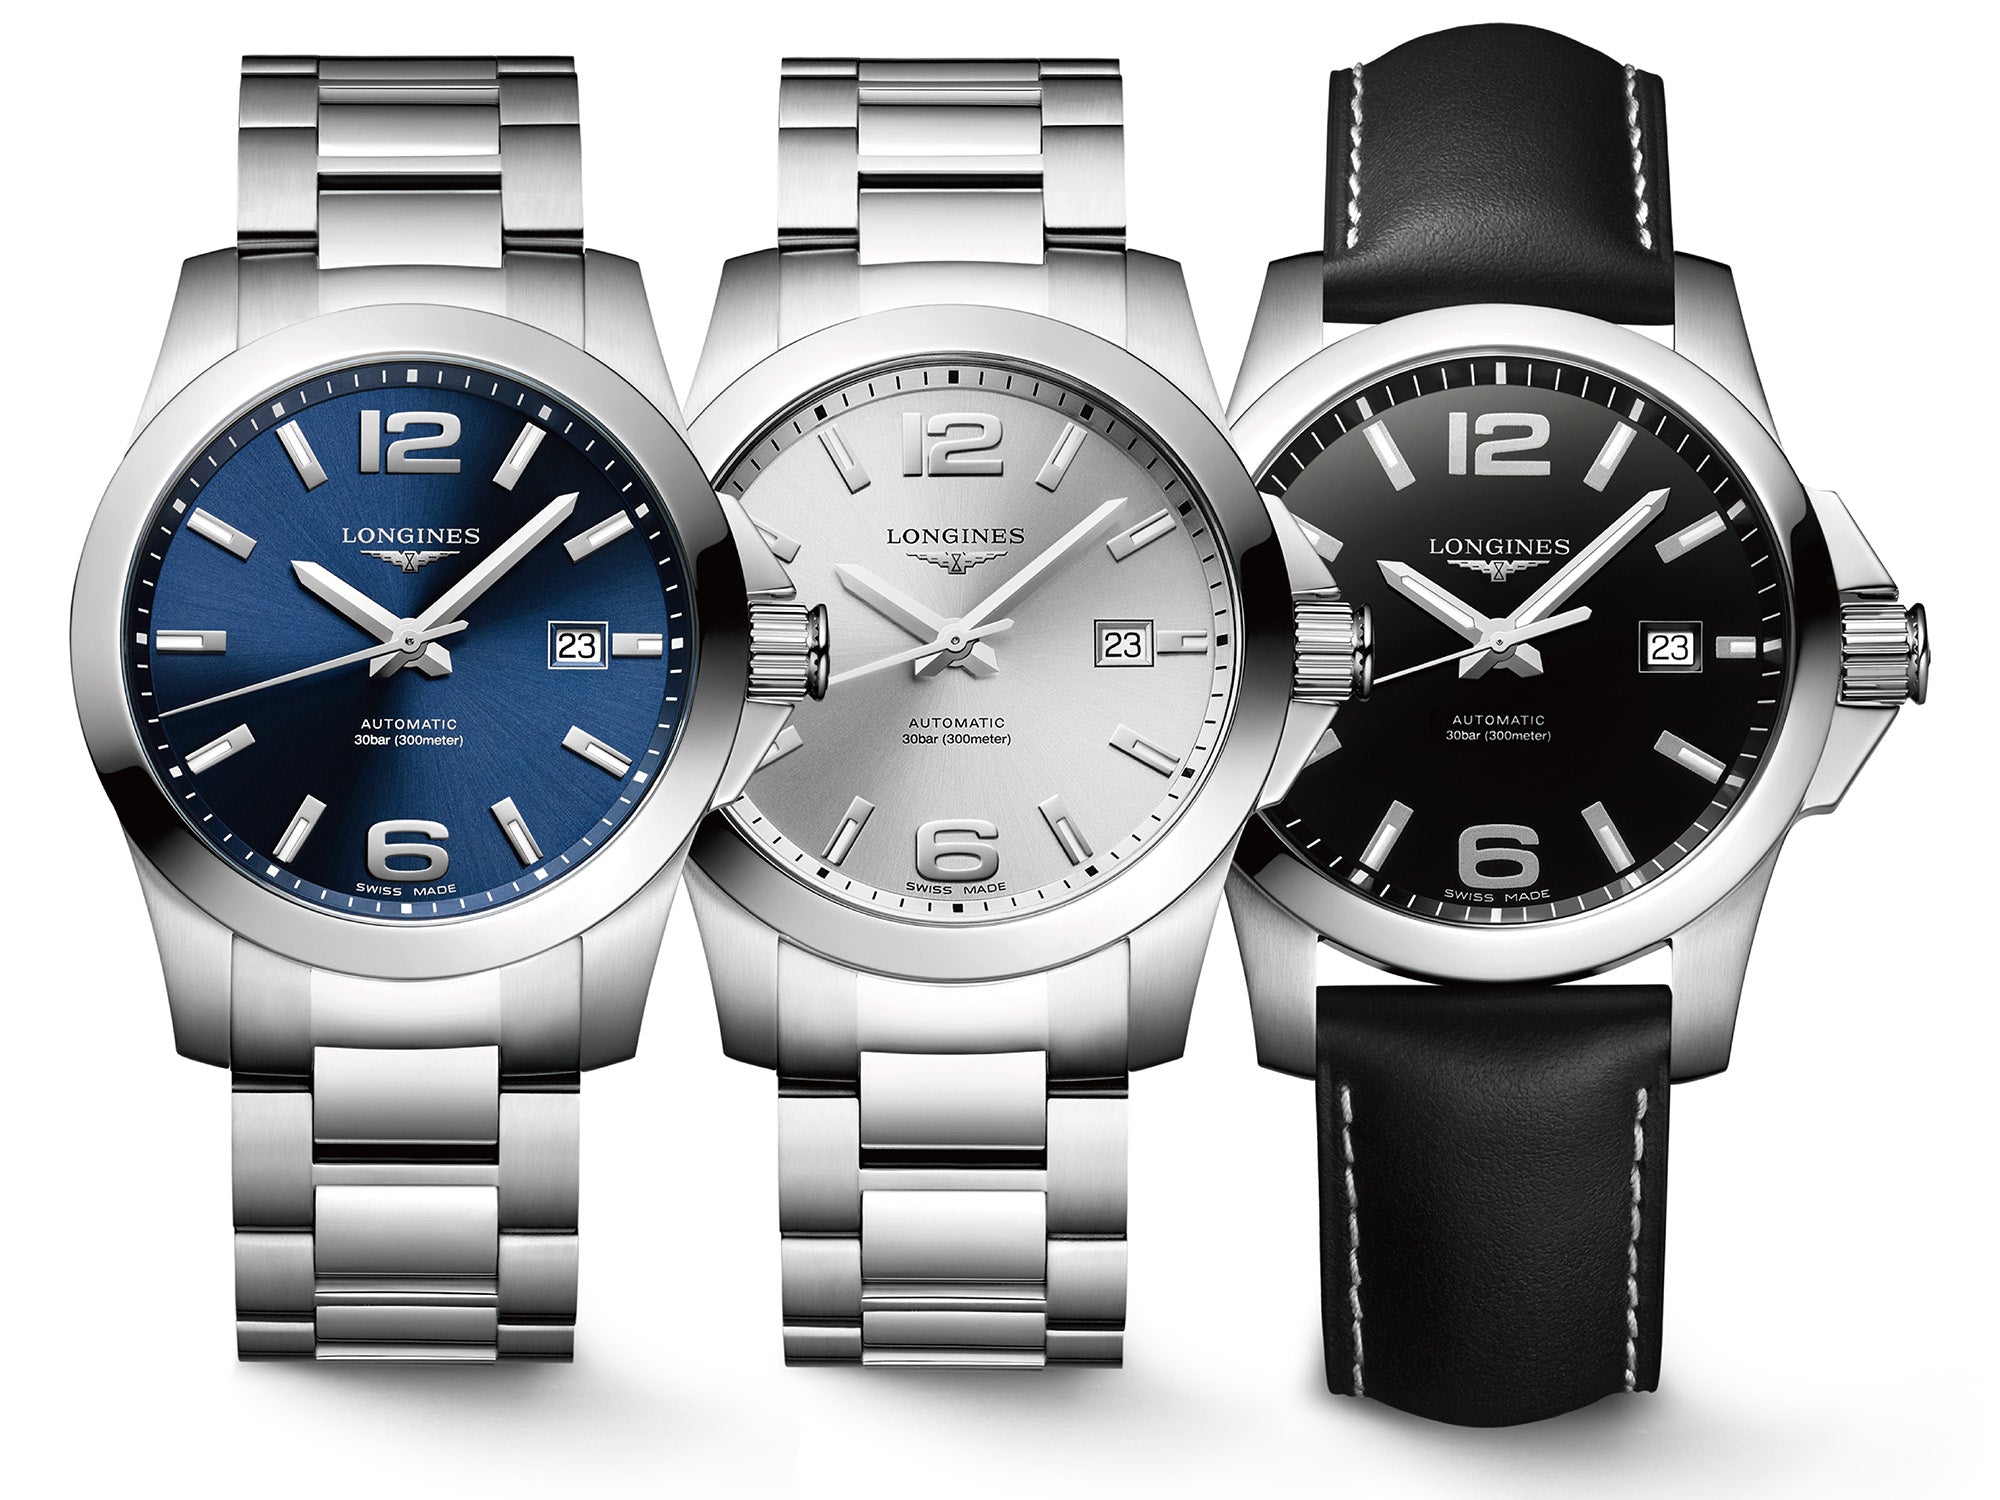 Longines Conquest 41mm Automatic has 3 color dial options